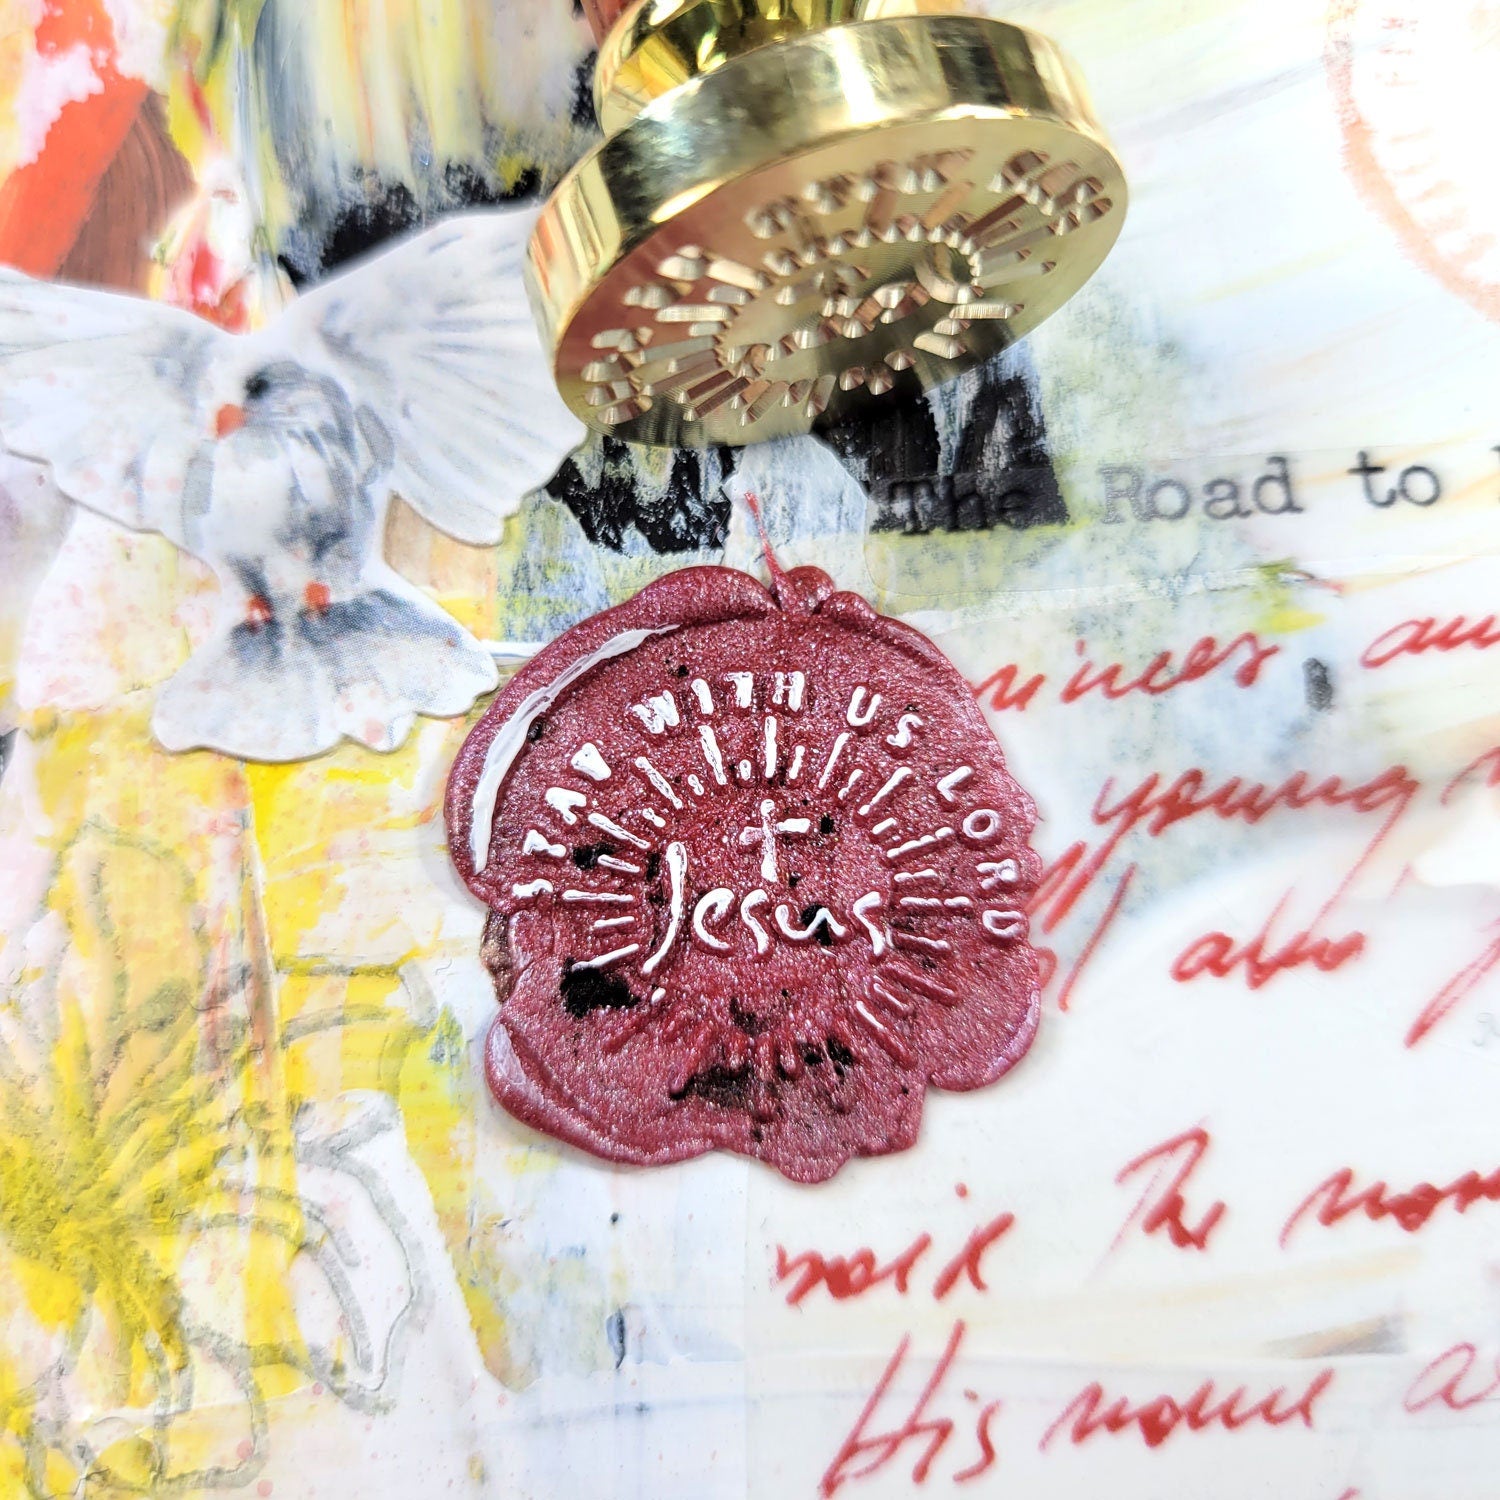 Jesus -Stay with us Lord - wax seal stamp